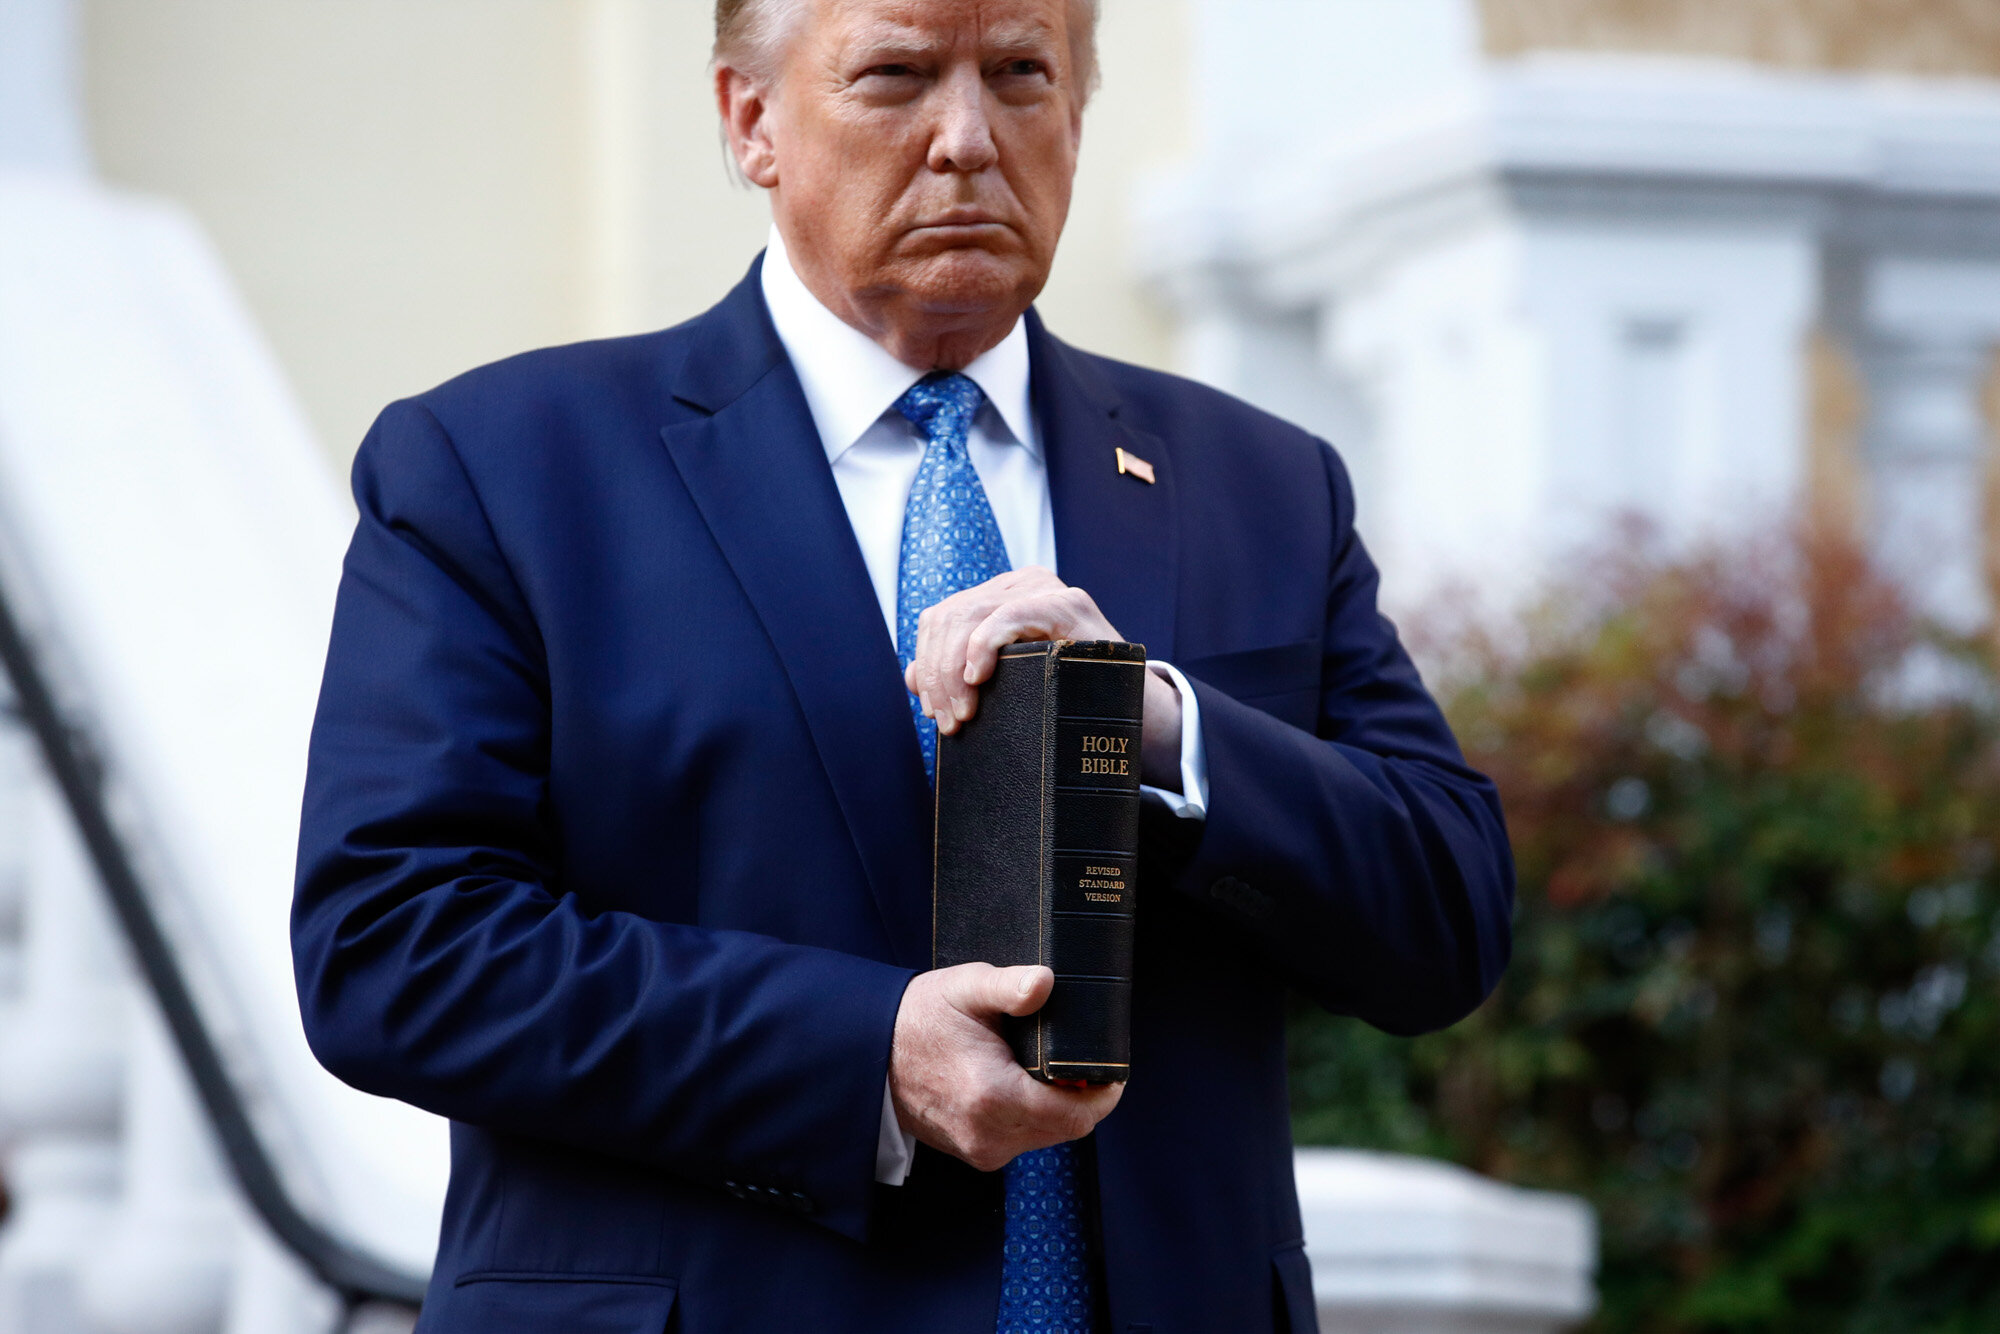  President Donald Trump holds a Bible as he stands outside St. John's Church across Lafayette Park from the White House in Washington on June 1, 2020, after law enforcement officers used tear gas and other riot control tactics to forcefully clear pea